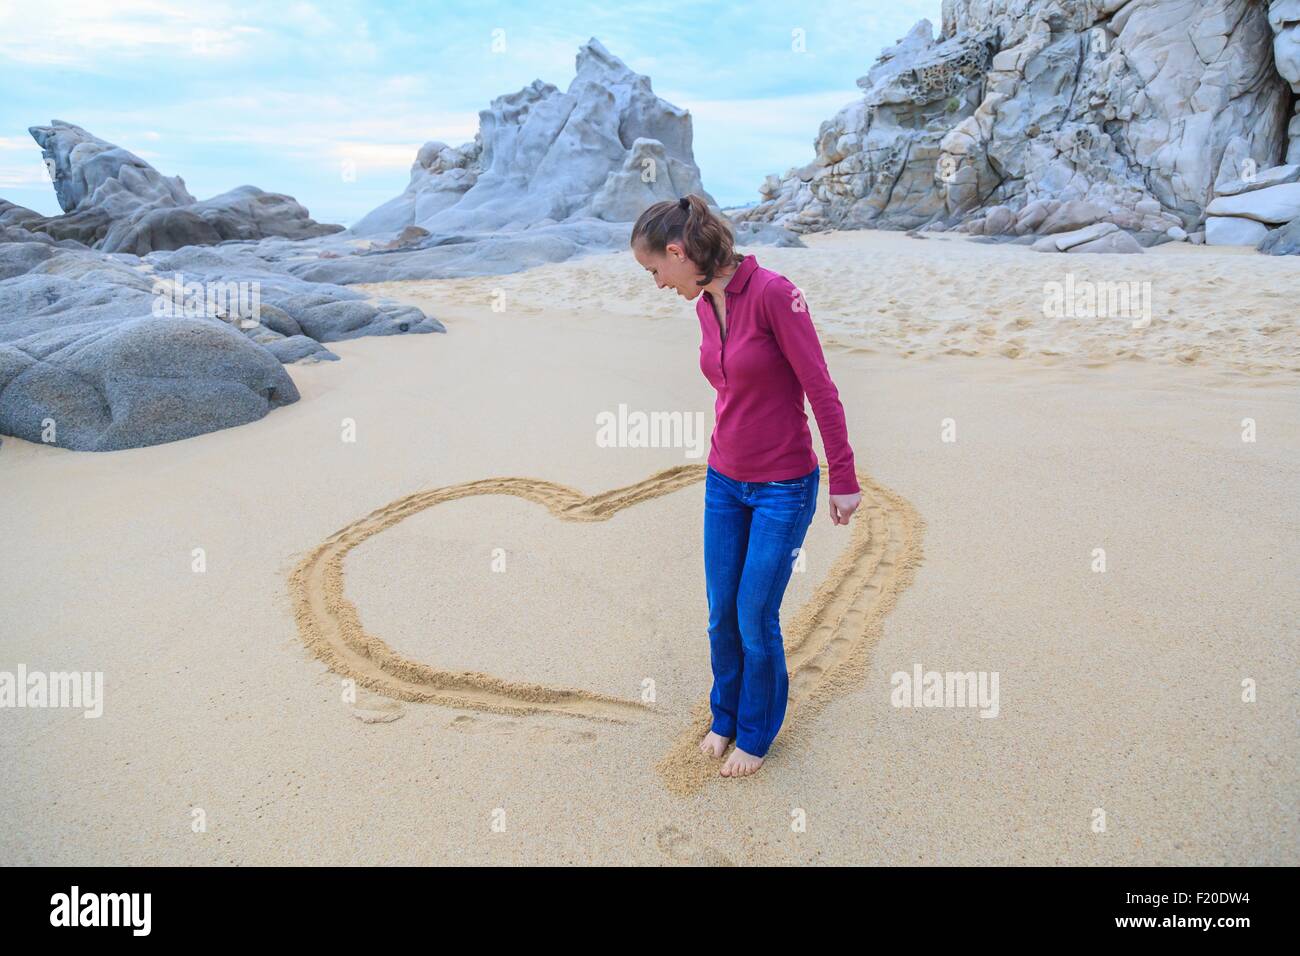 Mid adult woman on beach, drawing heart shape with feet Stock Photo